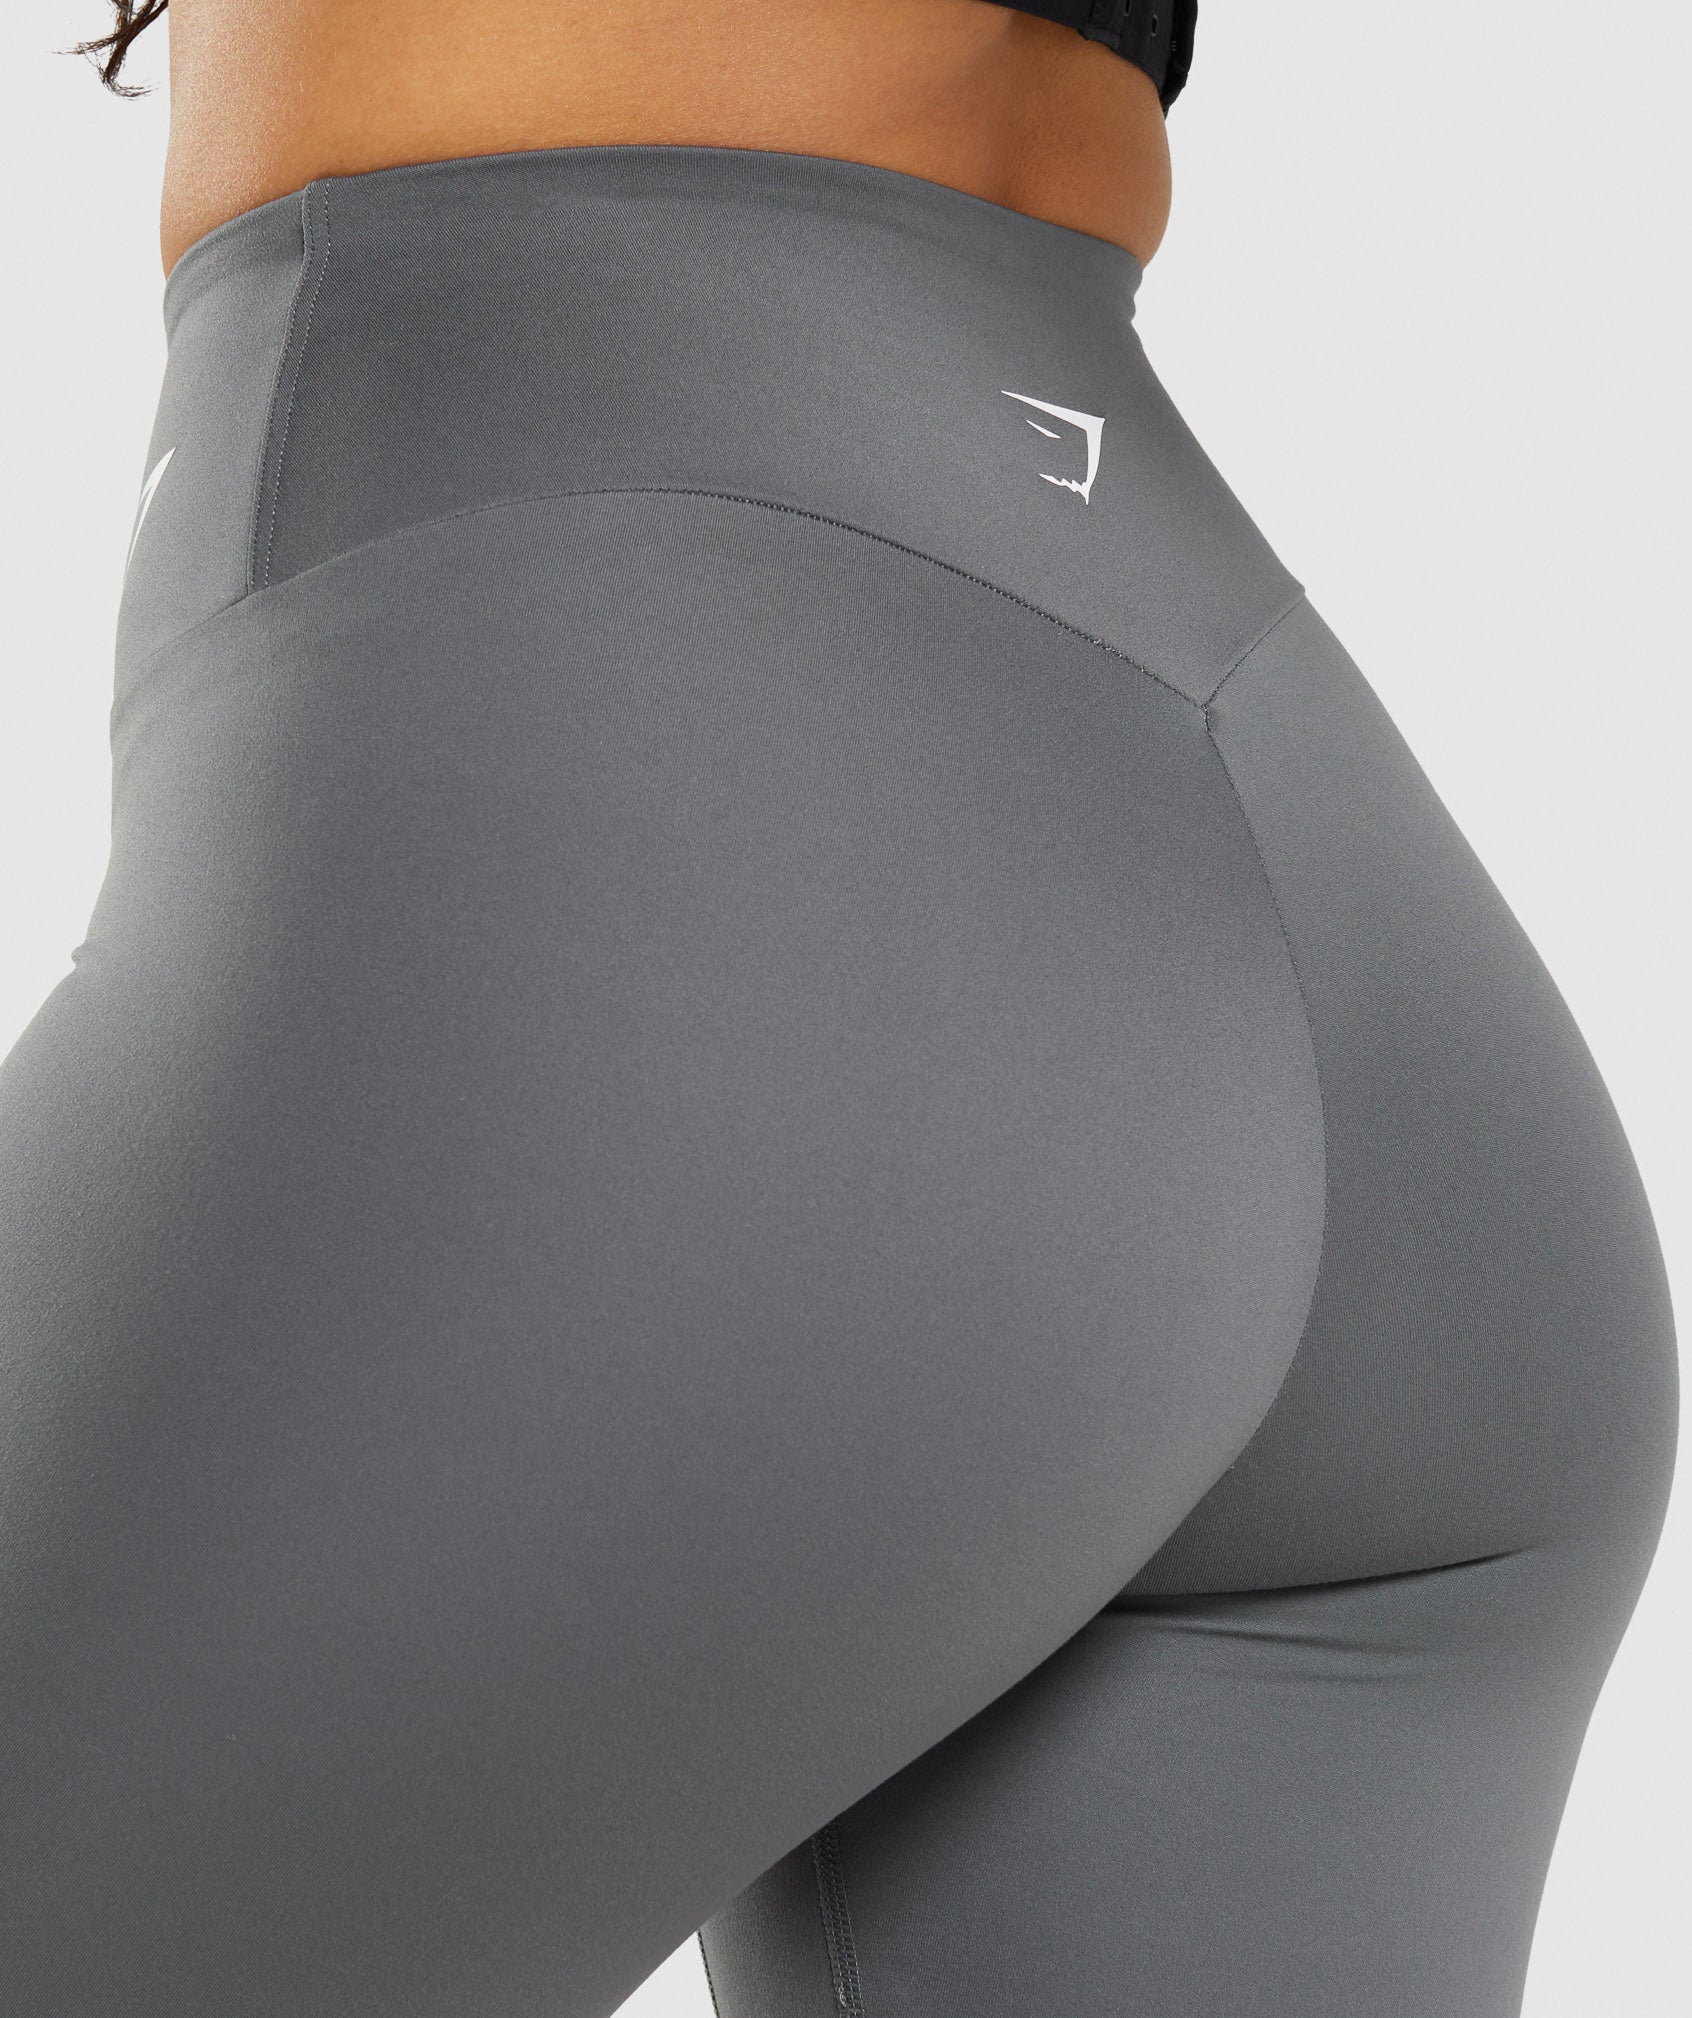 Training Cycling Shorts in Charcoal Grey - view 6